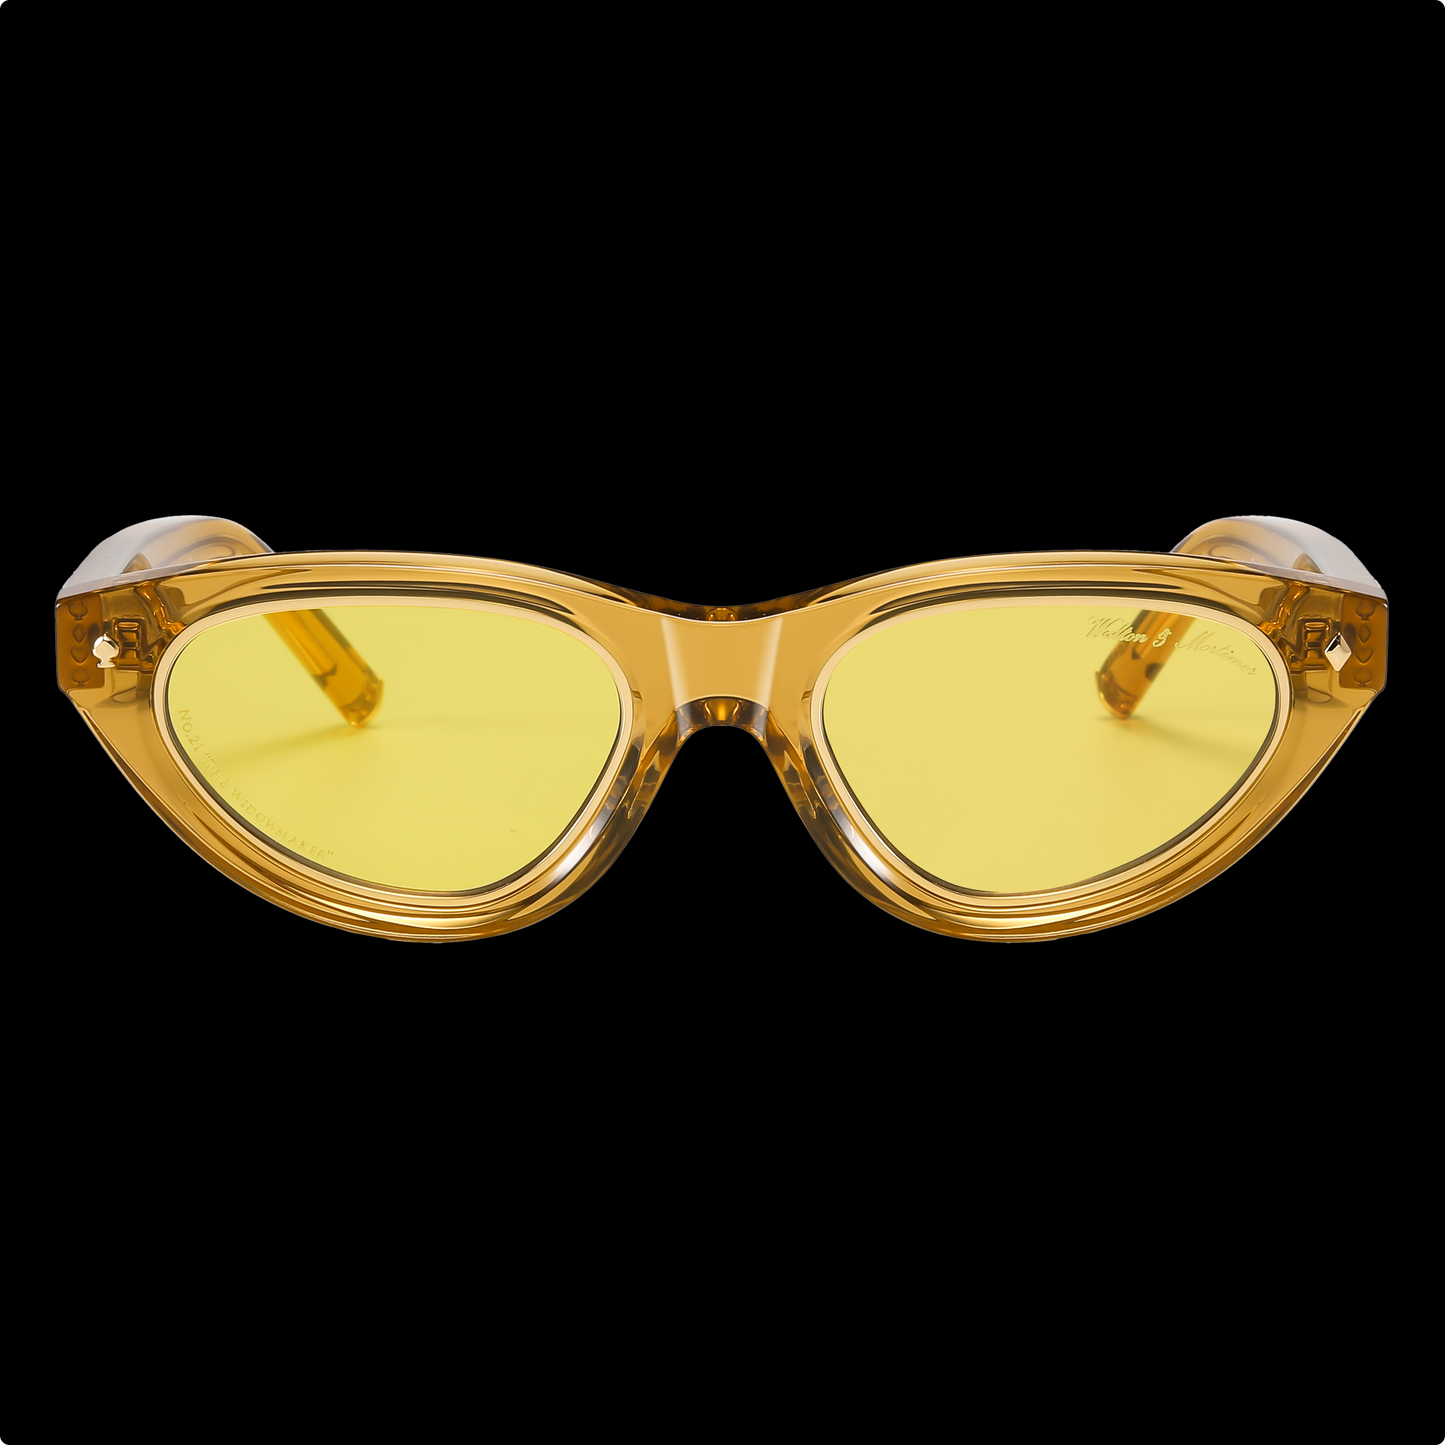 Walton & Mortimer® NO. 21 “The Widowmaker” Gold Champagne Limited Edition Sunglasses